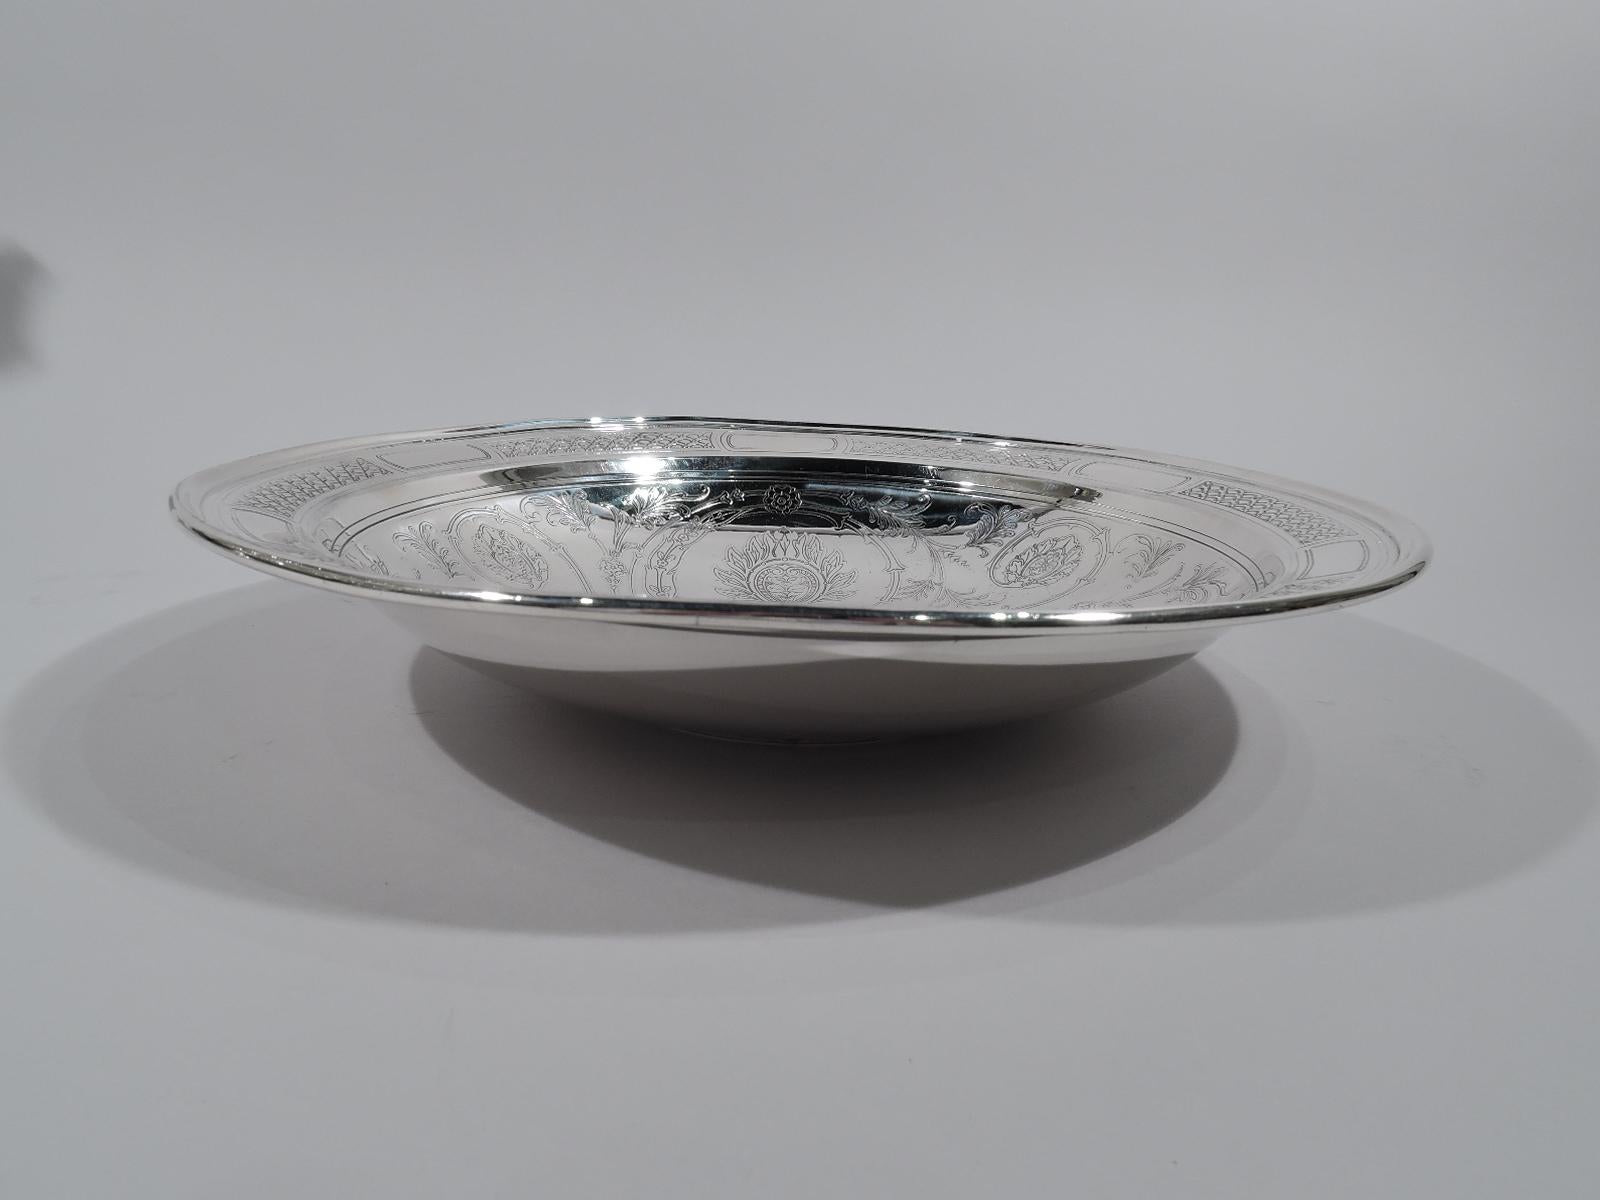 Aesthetic sterling silver bowl. Made by Tiffany & Co. in New York, ca 1914. Round with molded rim and foot ring. Acid-etched ornament. In well a bird with patterned plumage and loose foliate scrolls with flame flowers. Rim has tubular frames